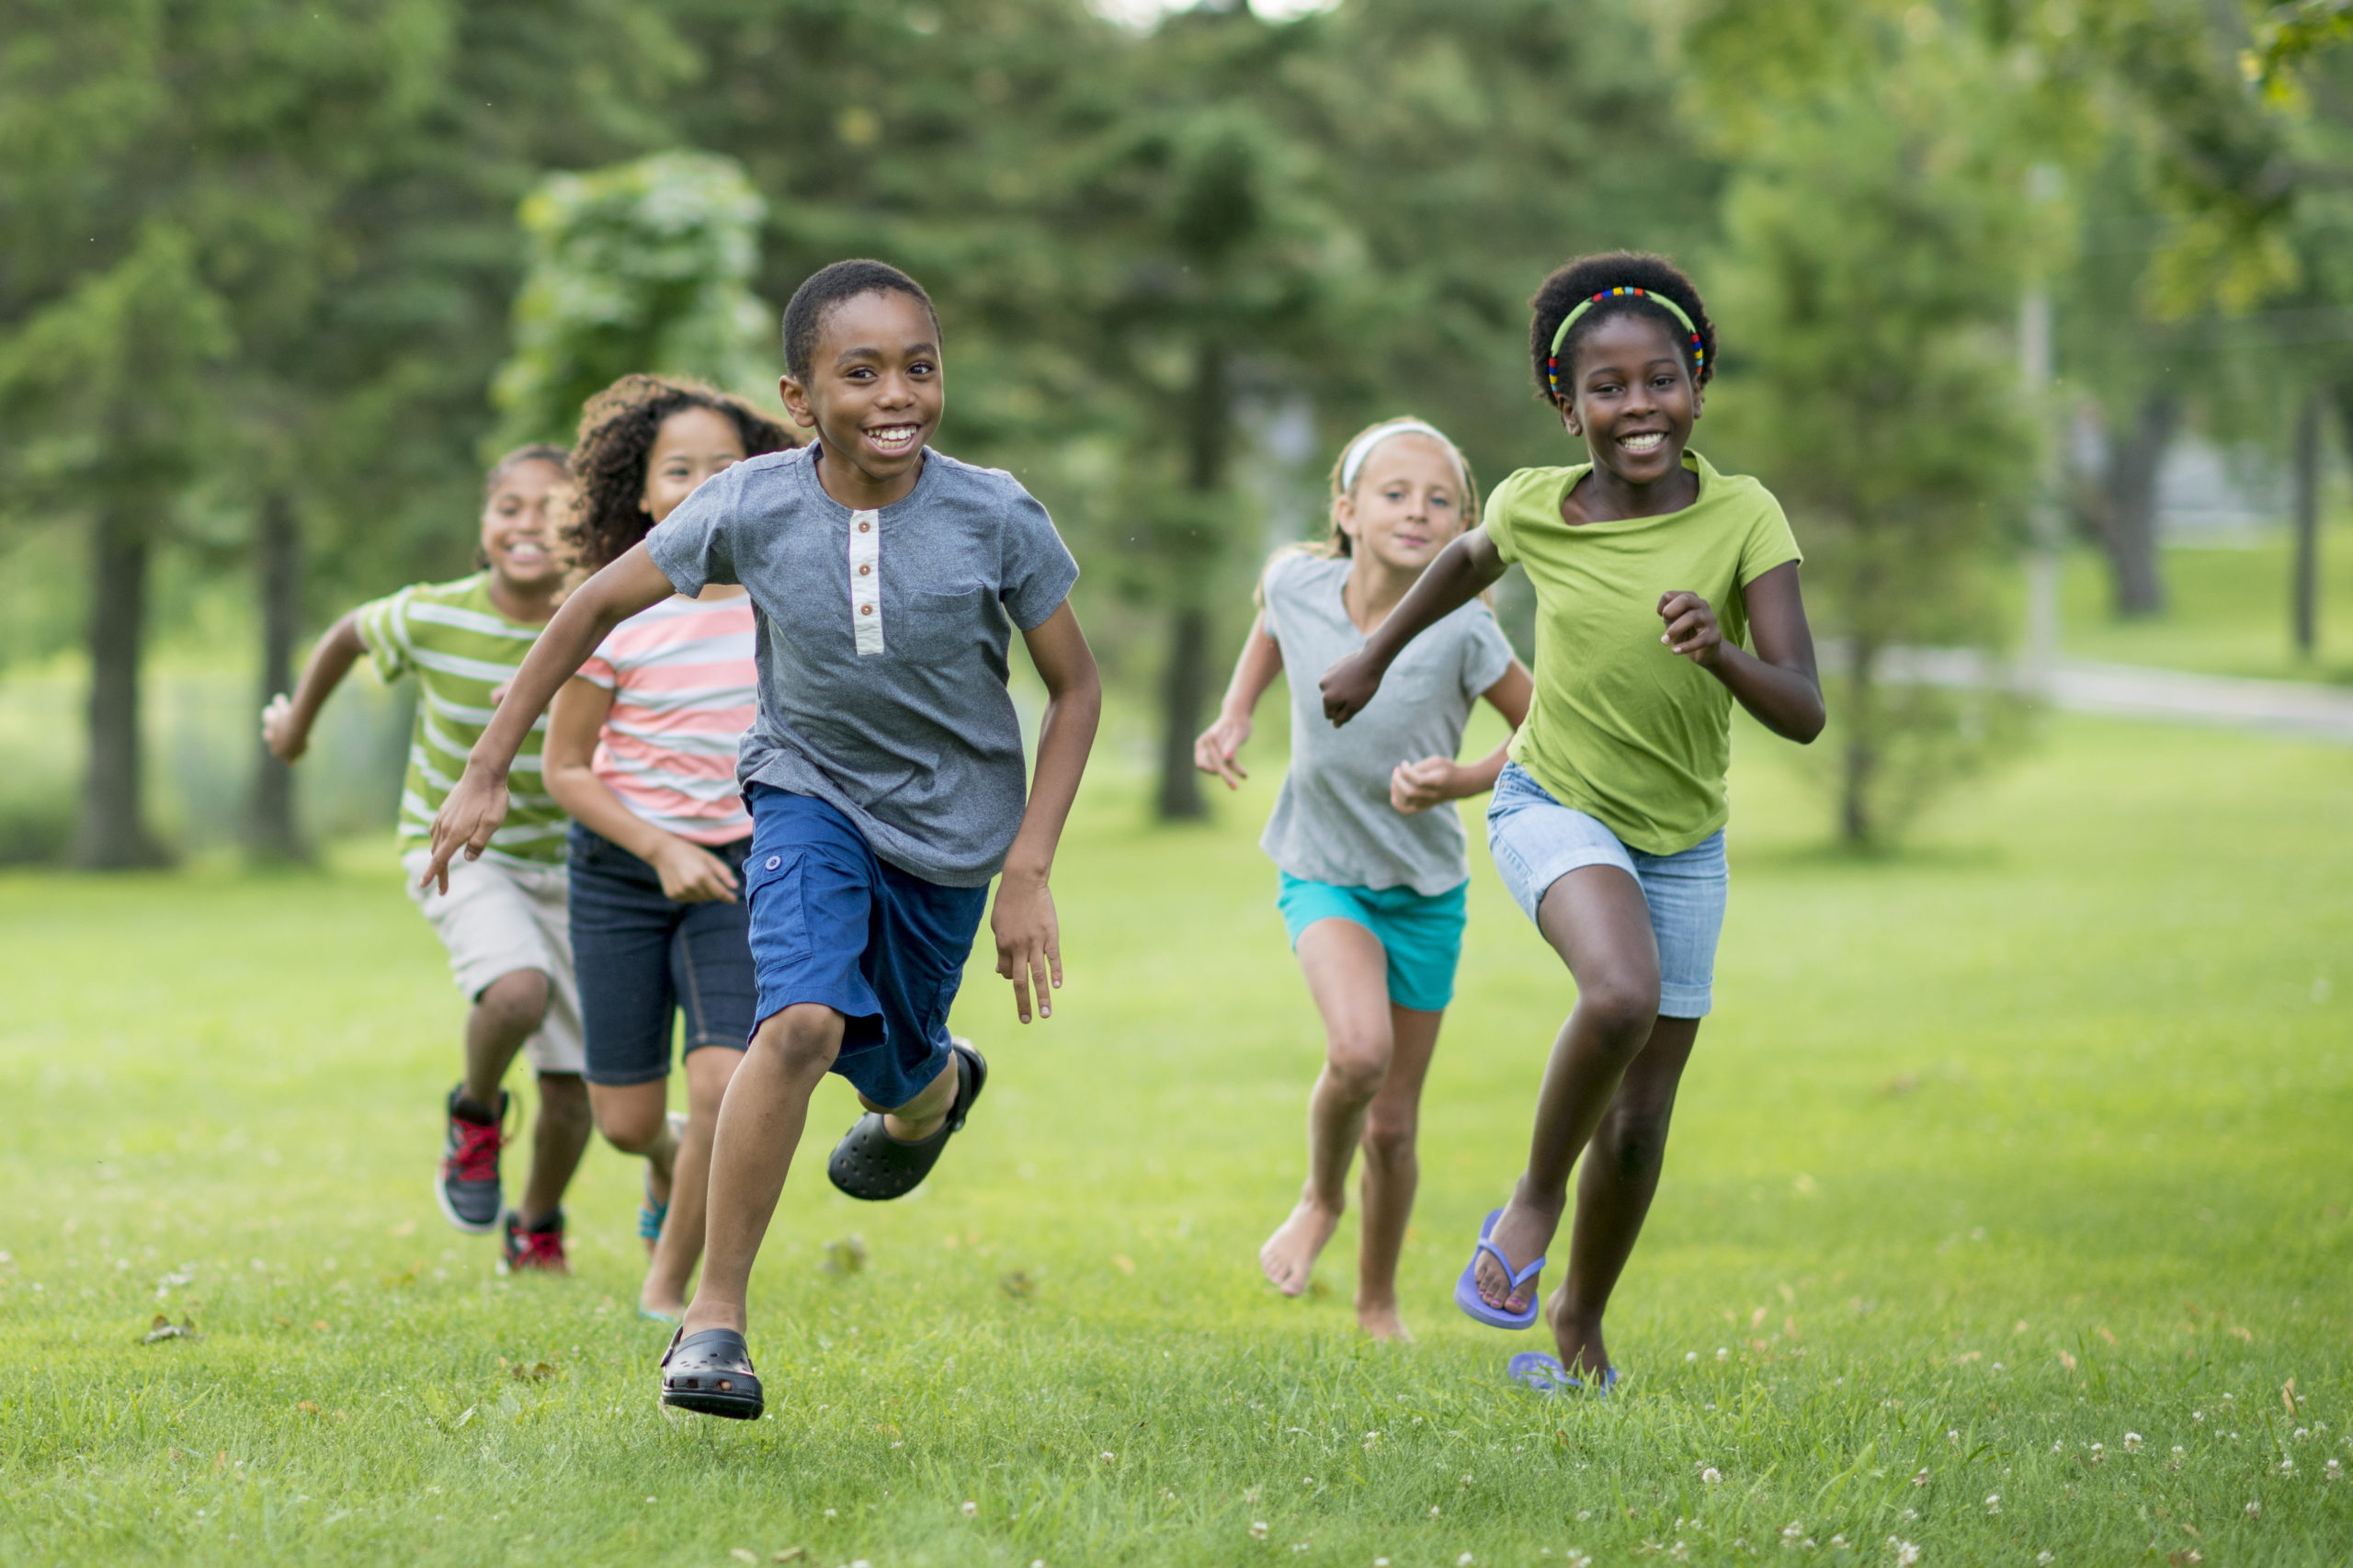 A multi-ethnic group of elementary age students are playing tag at the park during recess. They are happily chasing each other through the grass on a sunny day.